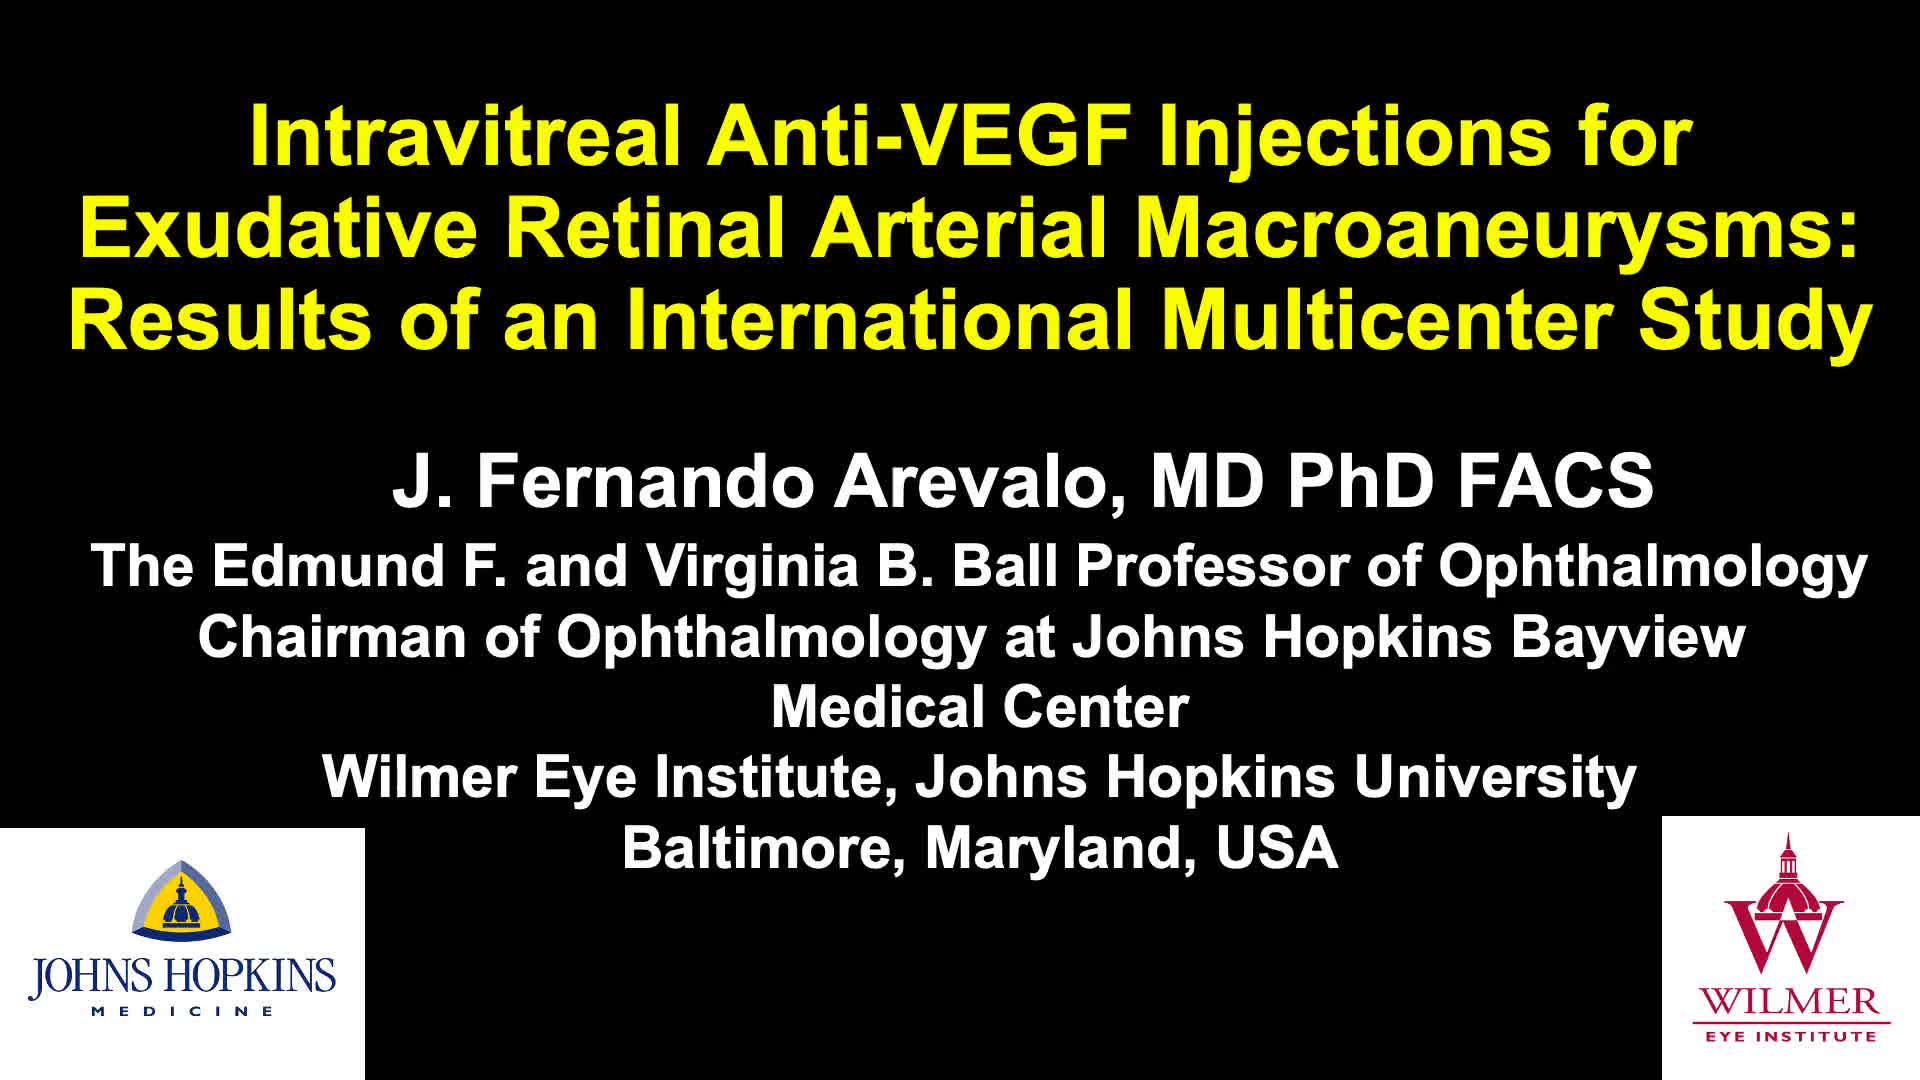 Intravitreal Anti-VEGF Injections for Exudative Retinal Arterial Macroaneurysms